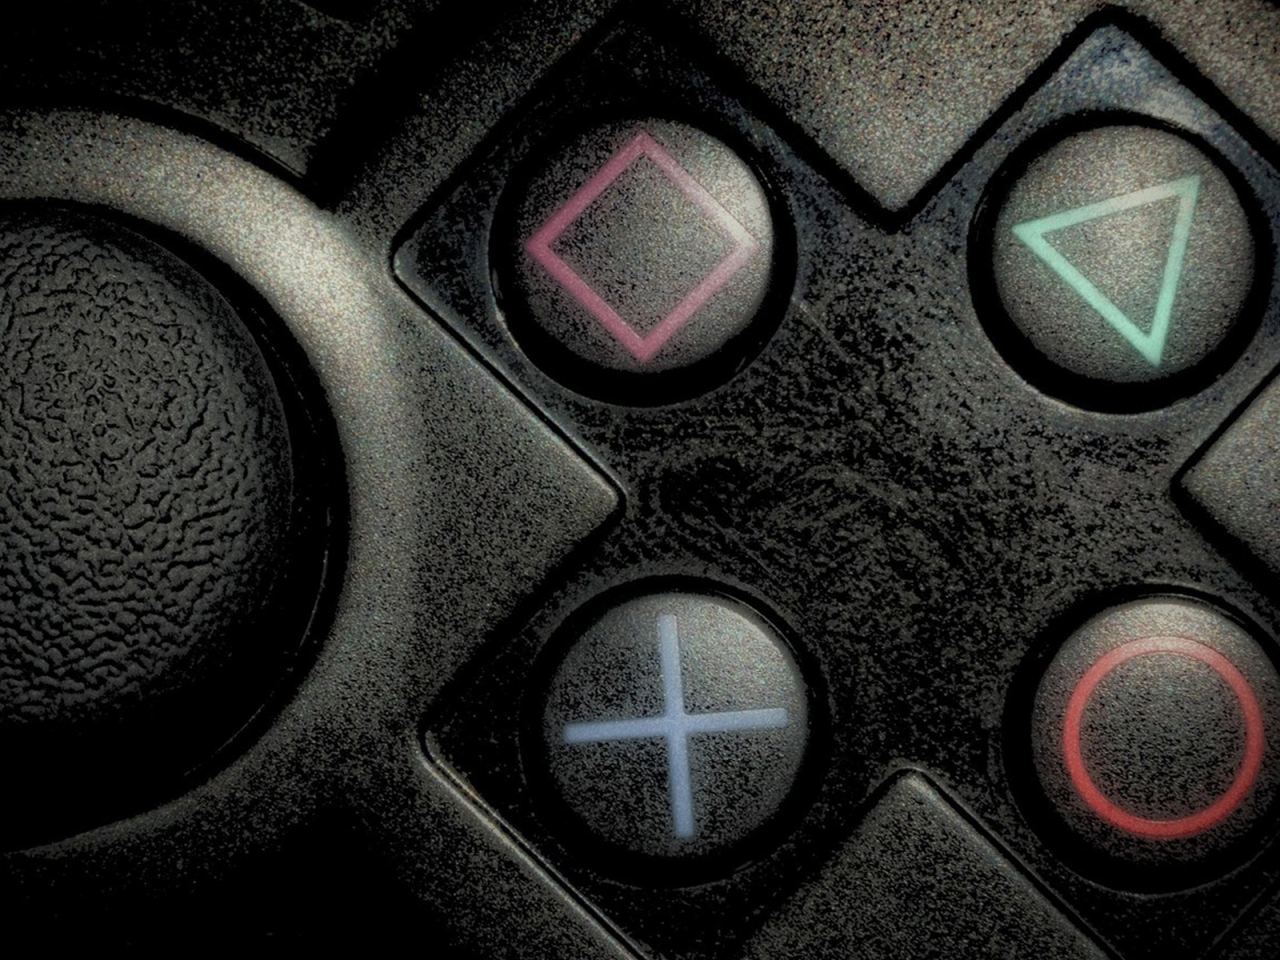 Playstation Buttons for 1280 x 960 resolution